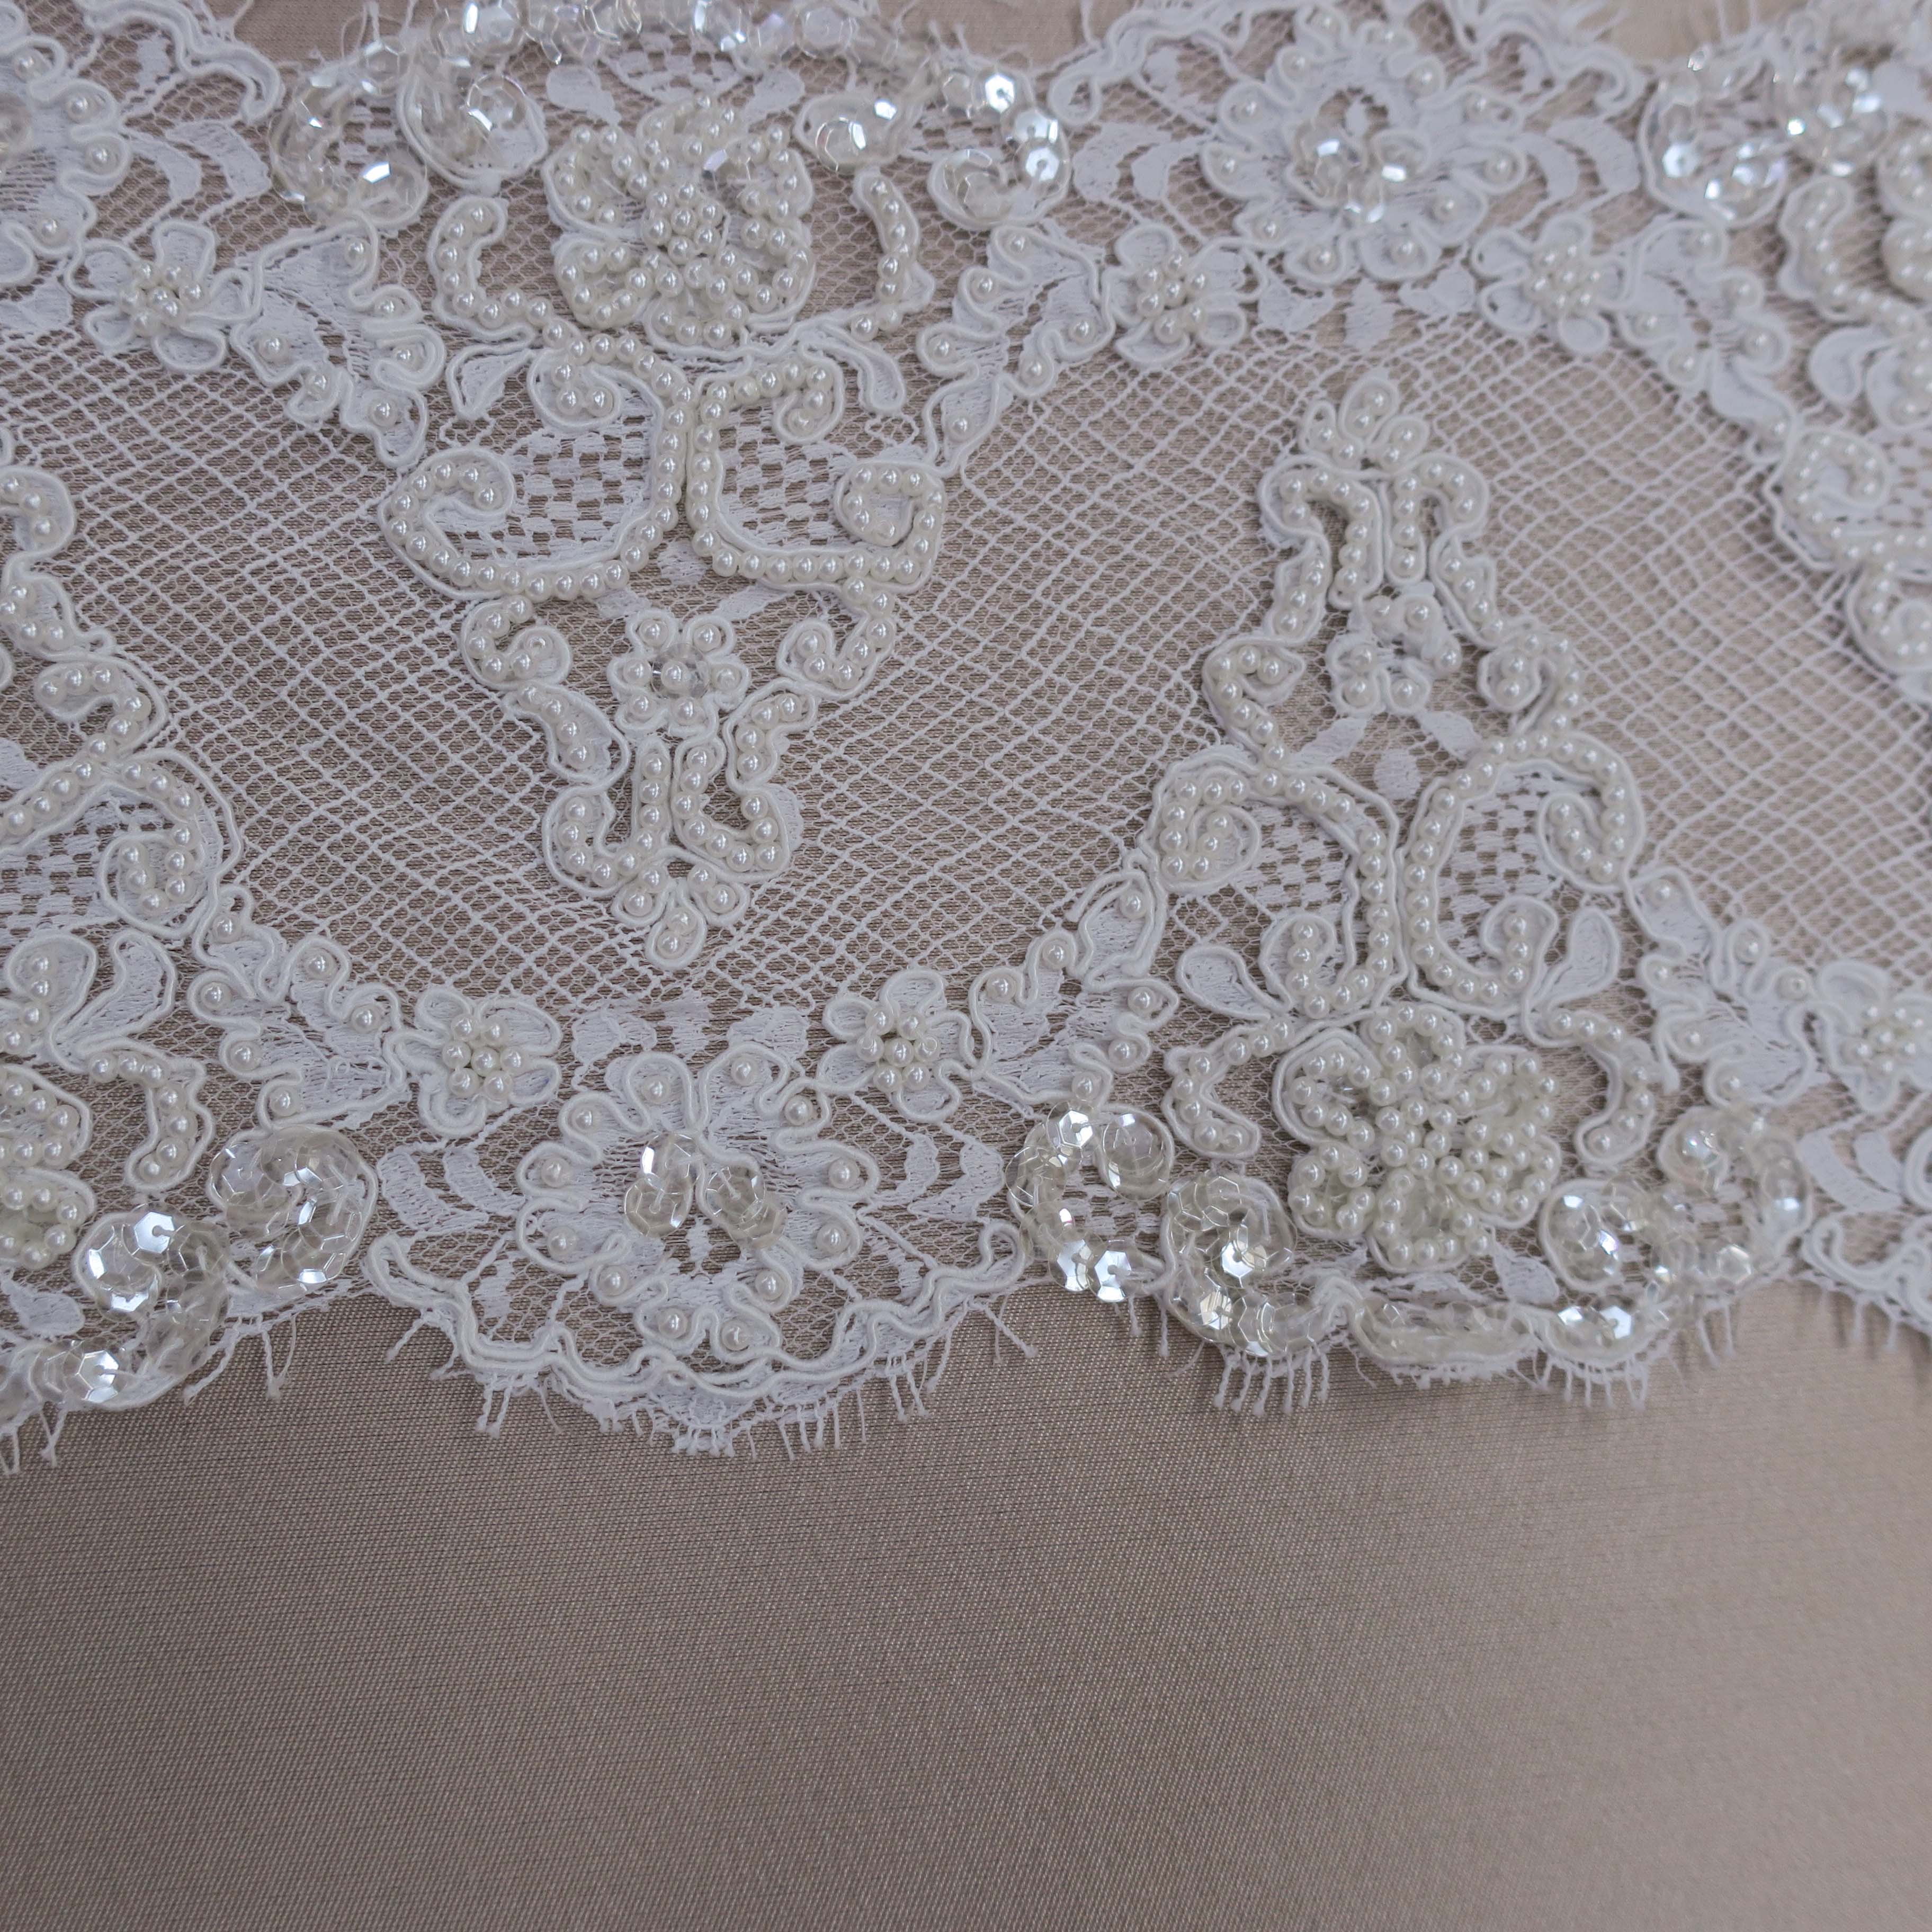 Beaded & Corded Lace Fabric Embroidered on 100% Polyester Net Mesh | Lace  USA